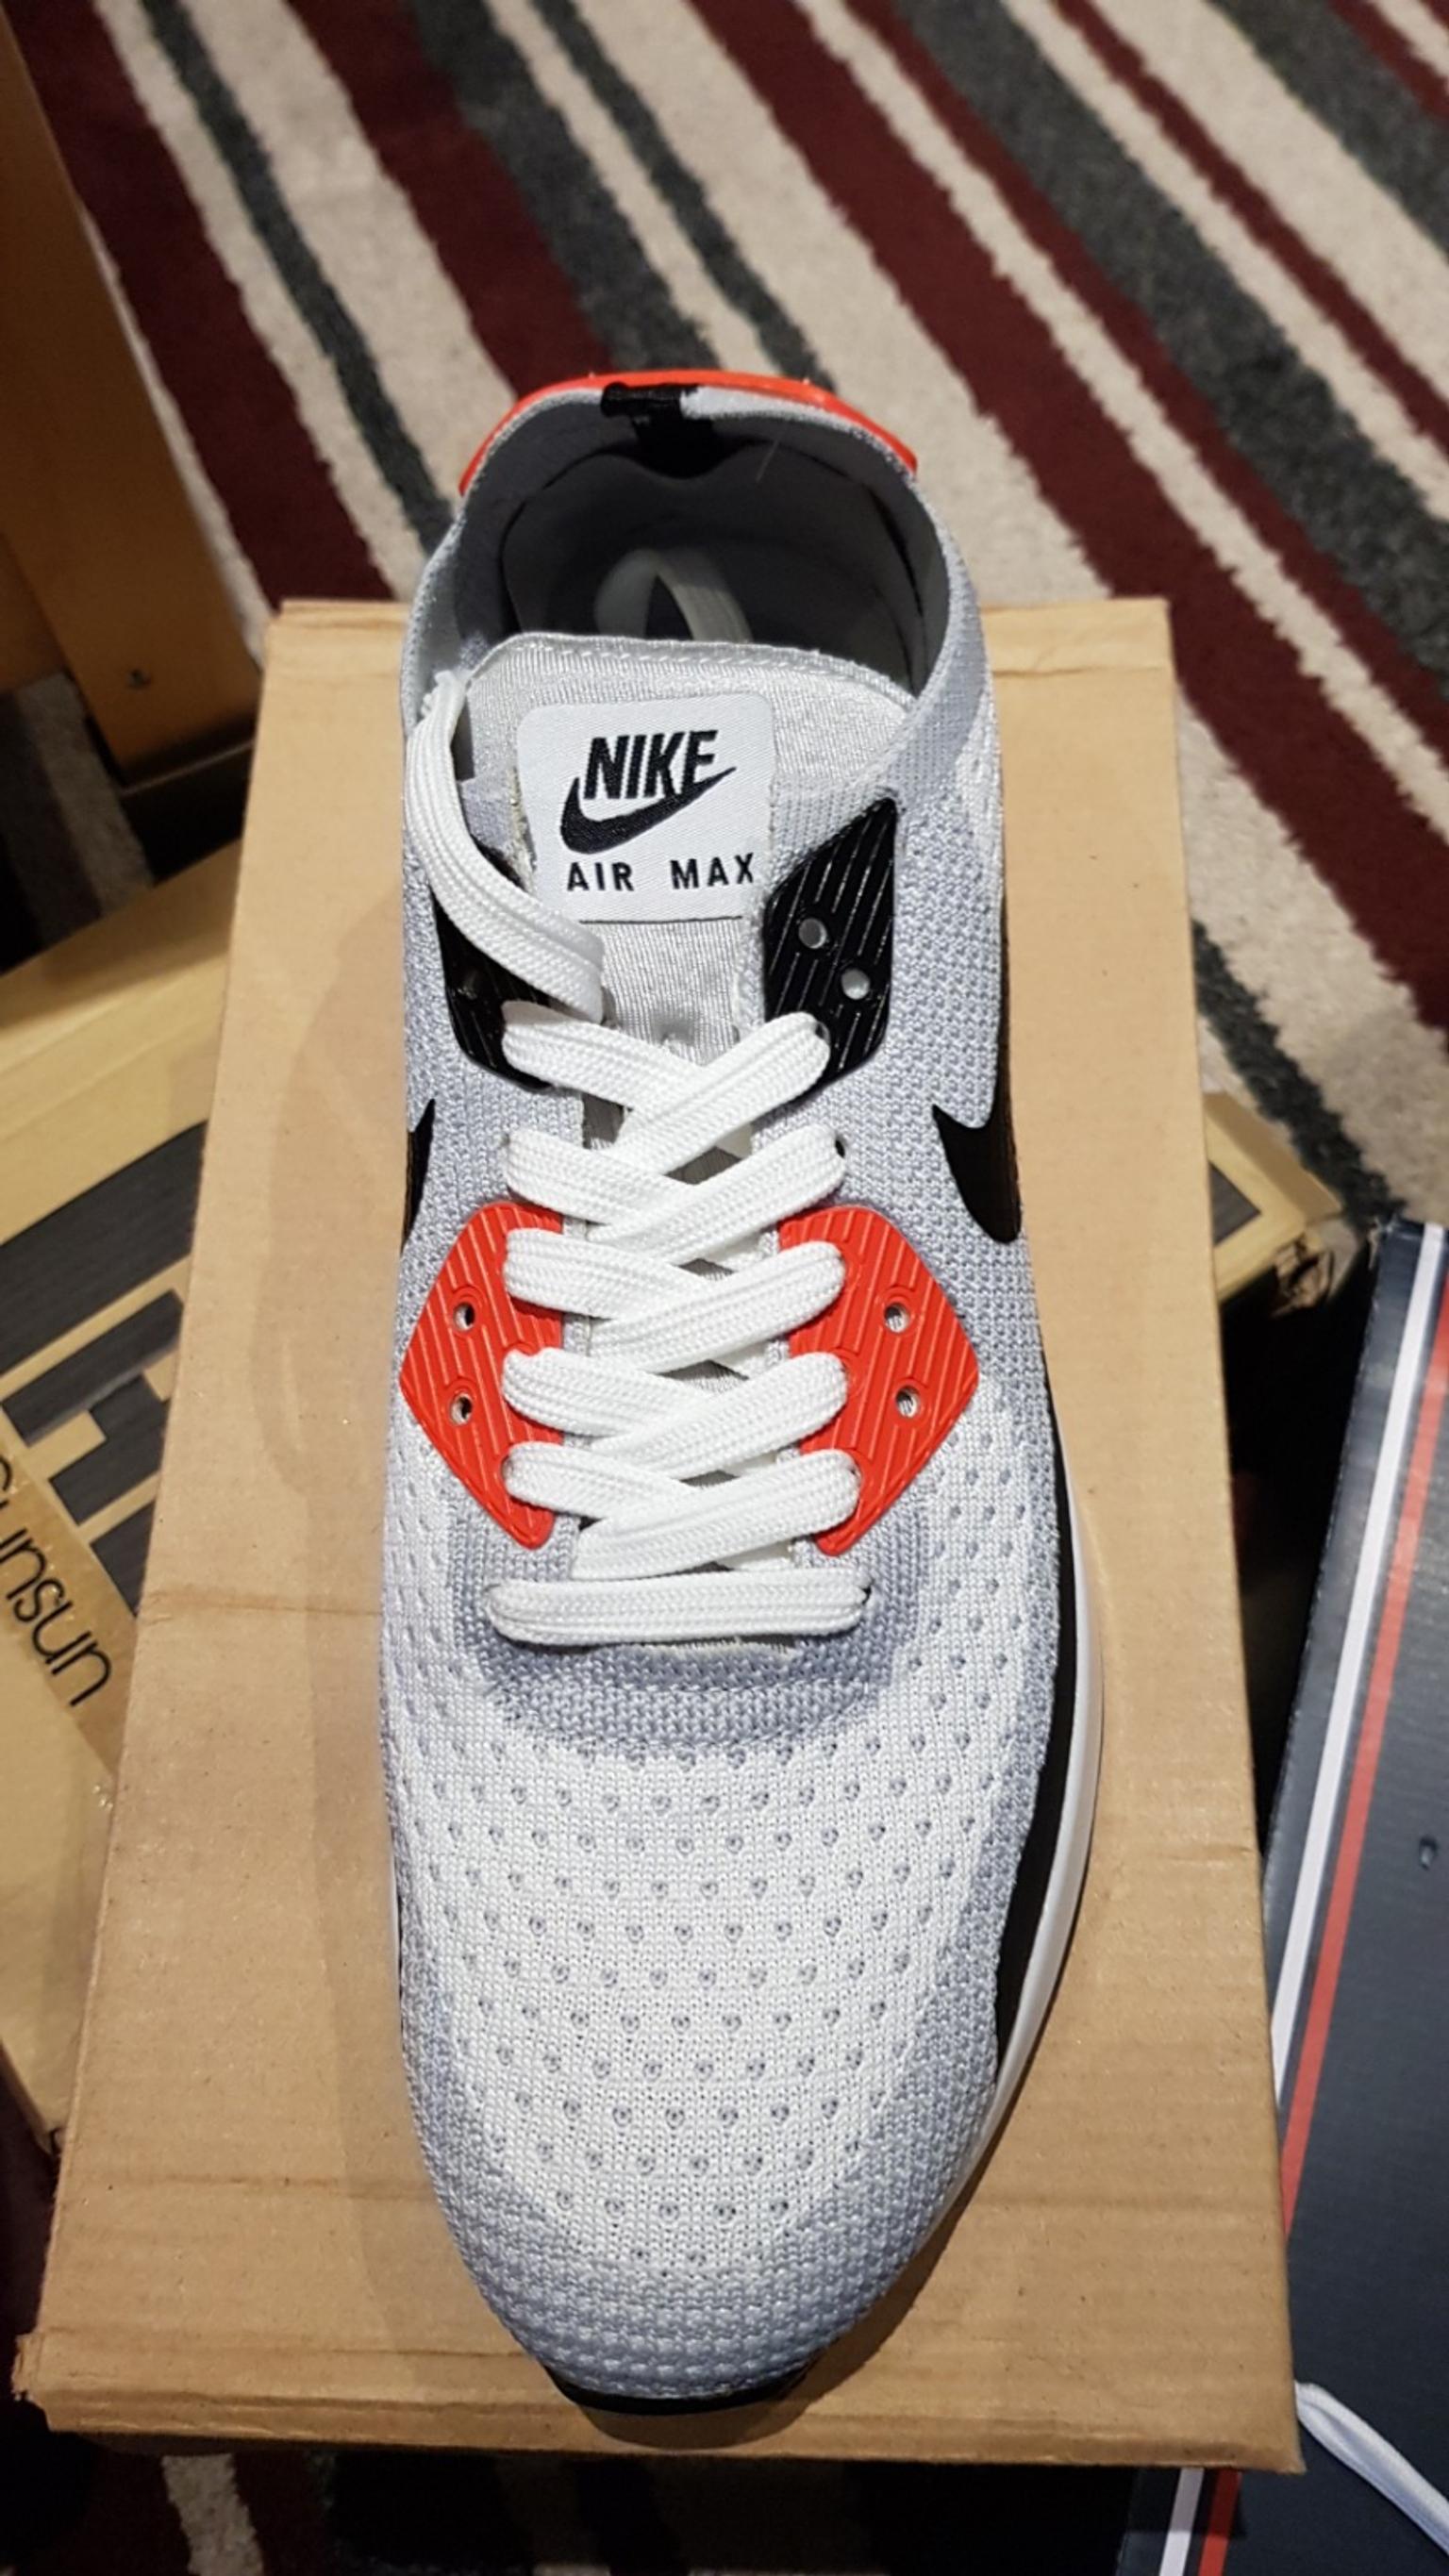 exclusive nike trainers mens